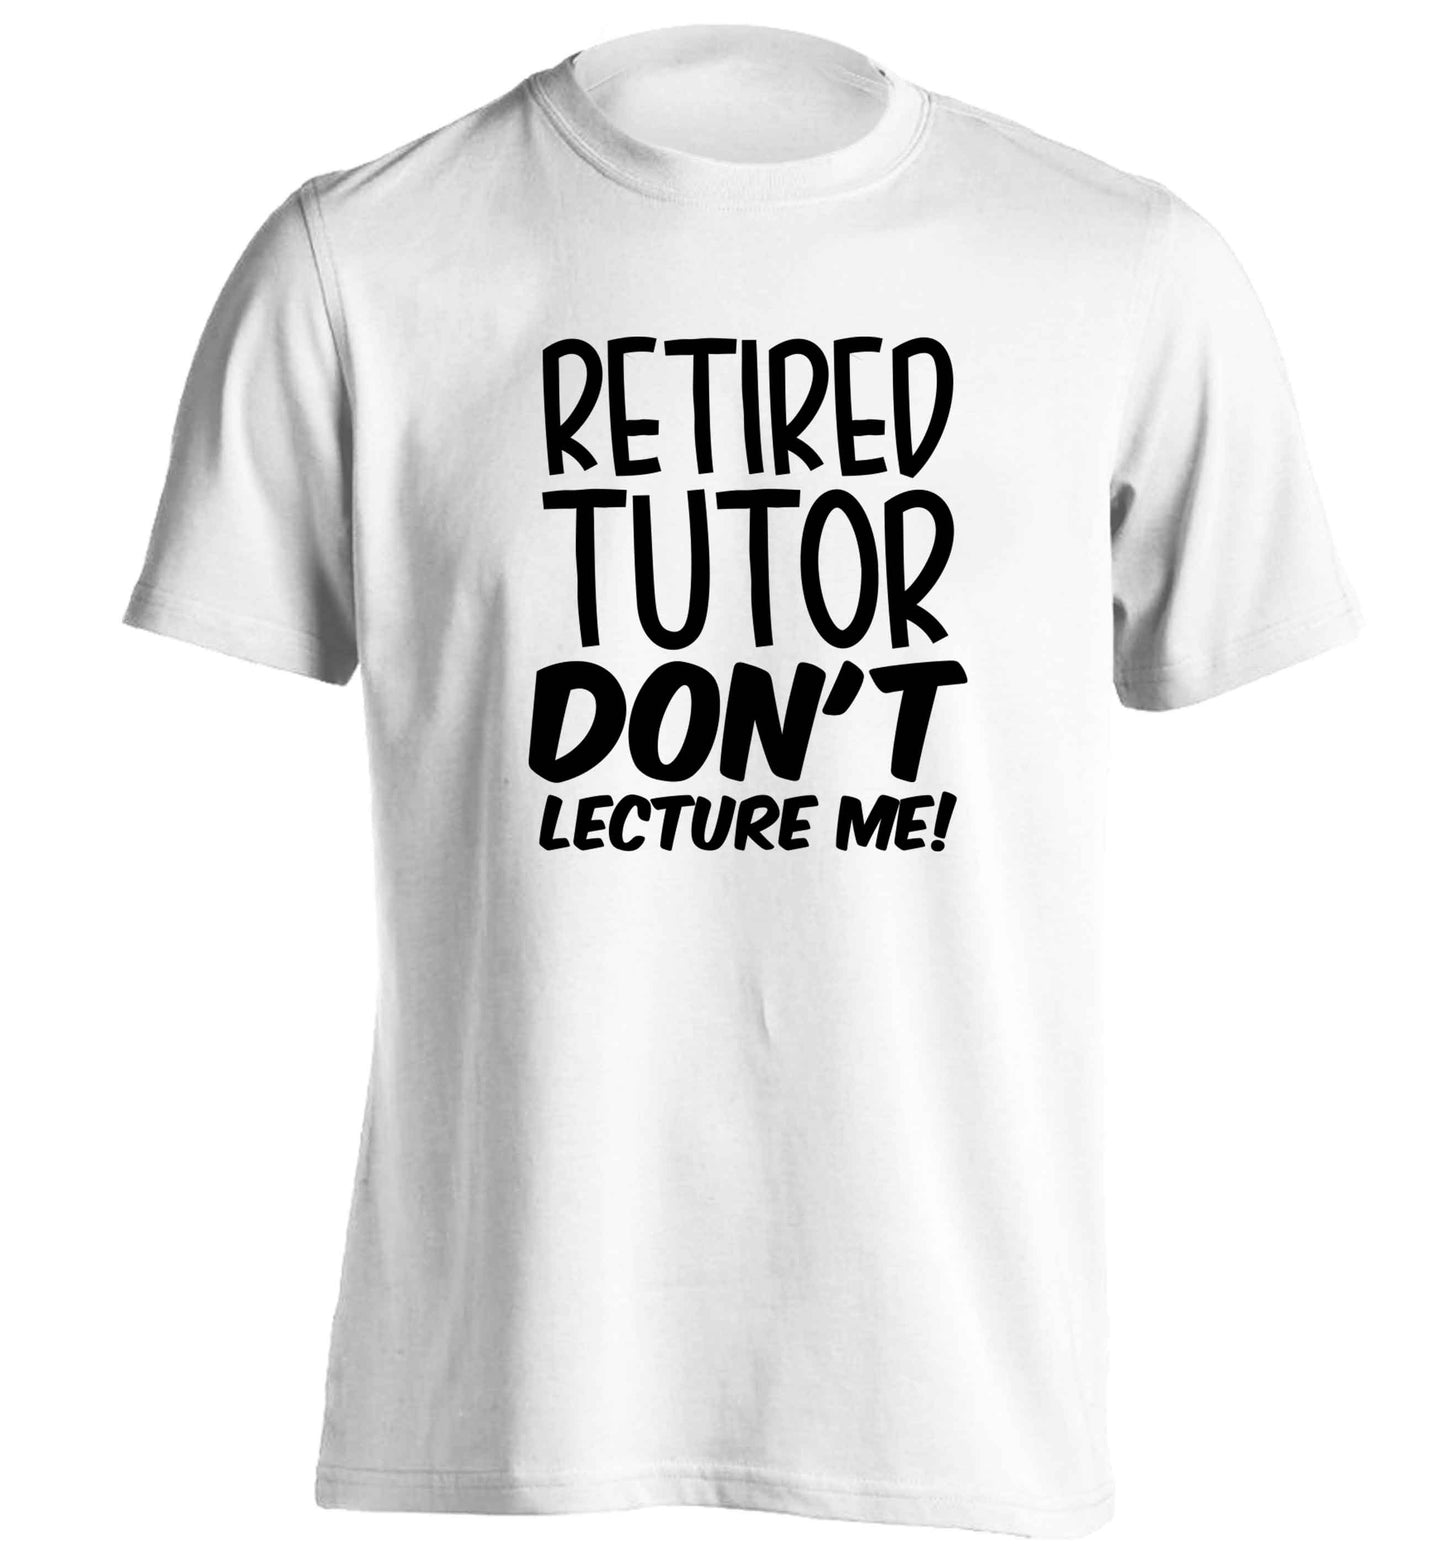 Retired tutor don't lecture me! adults unisex white Tshirt 2XL